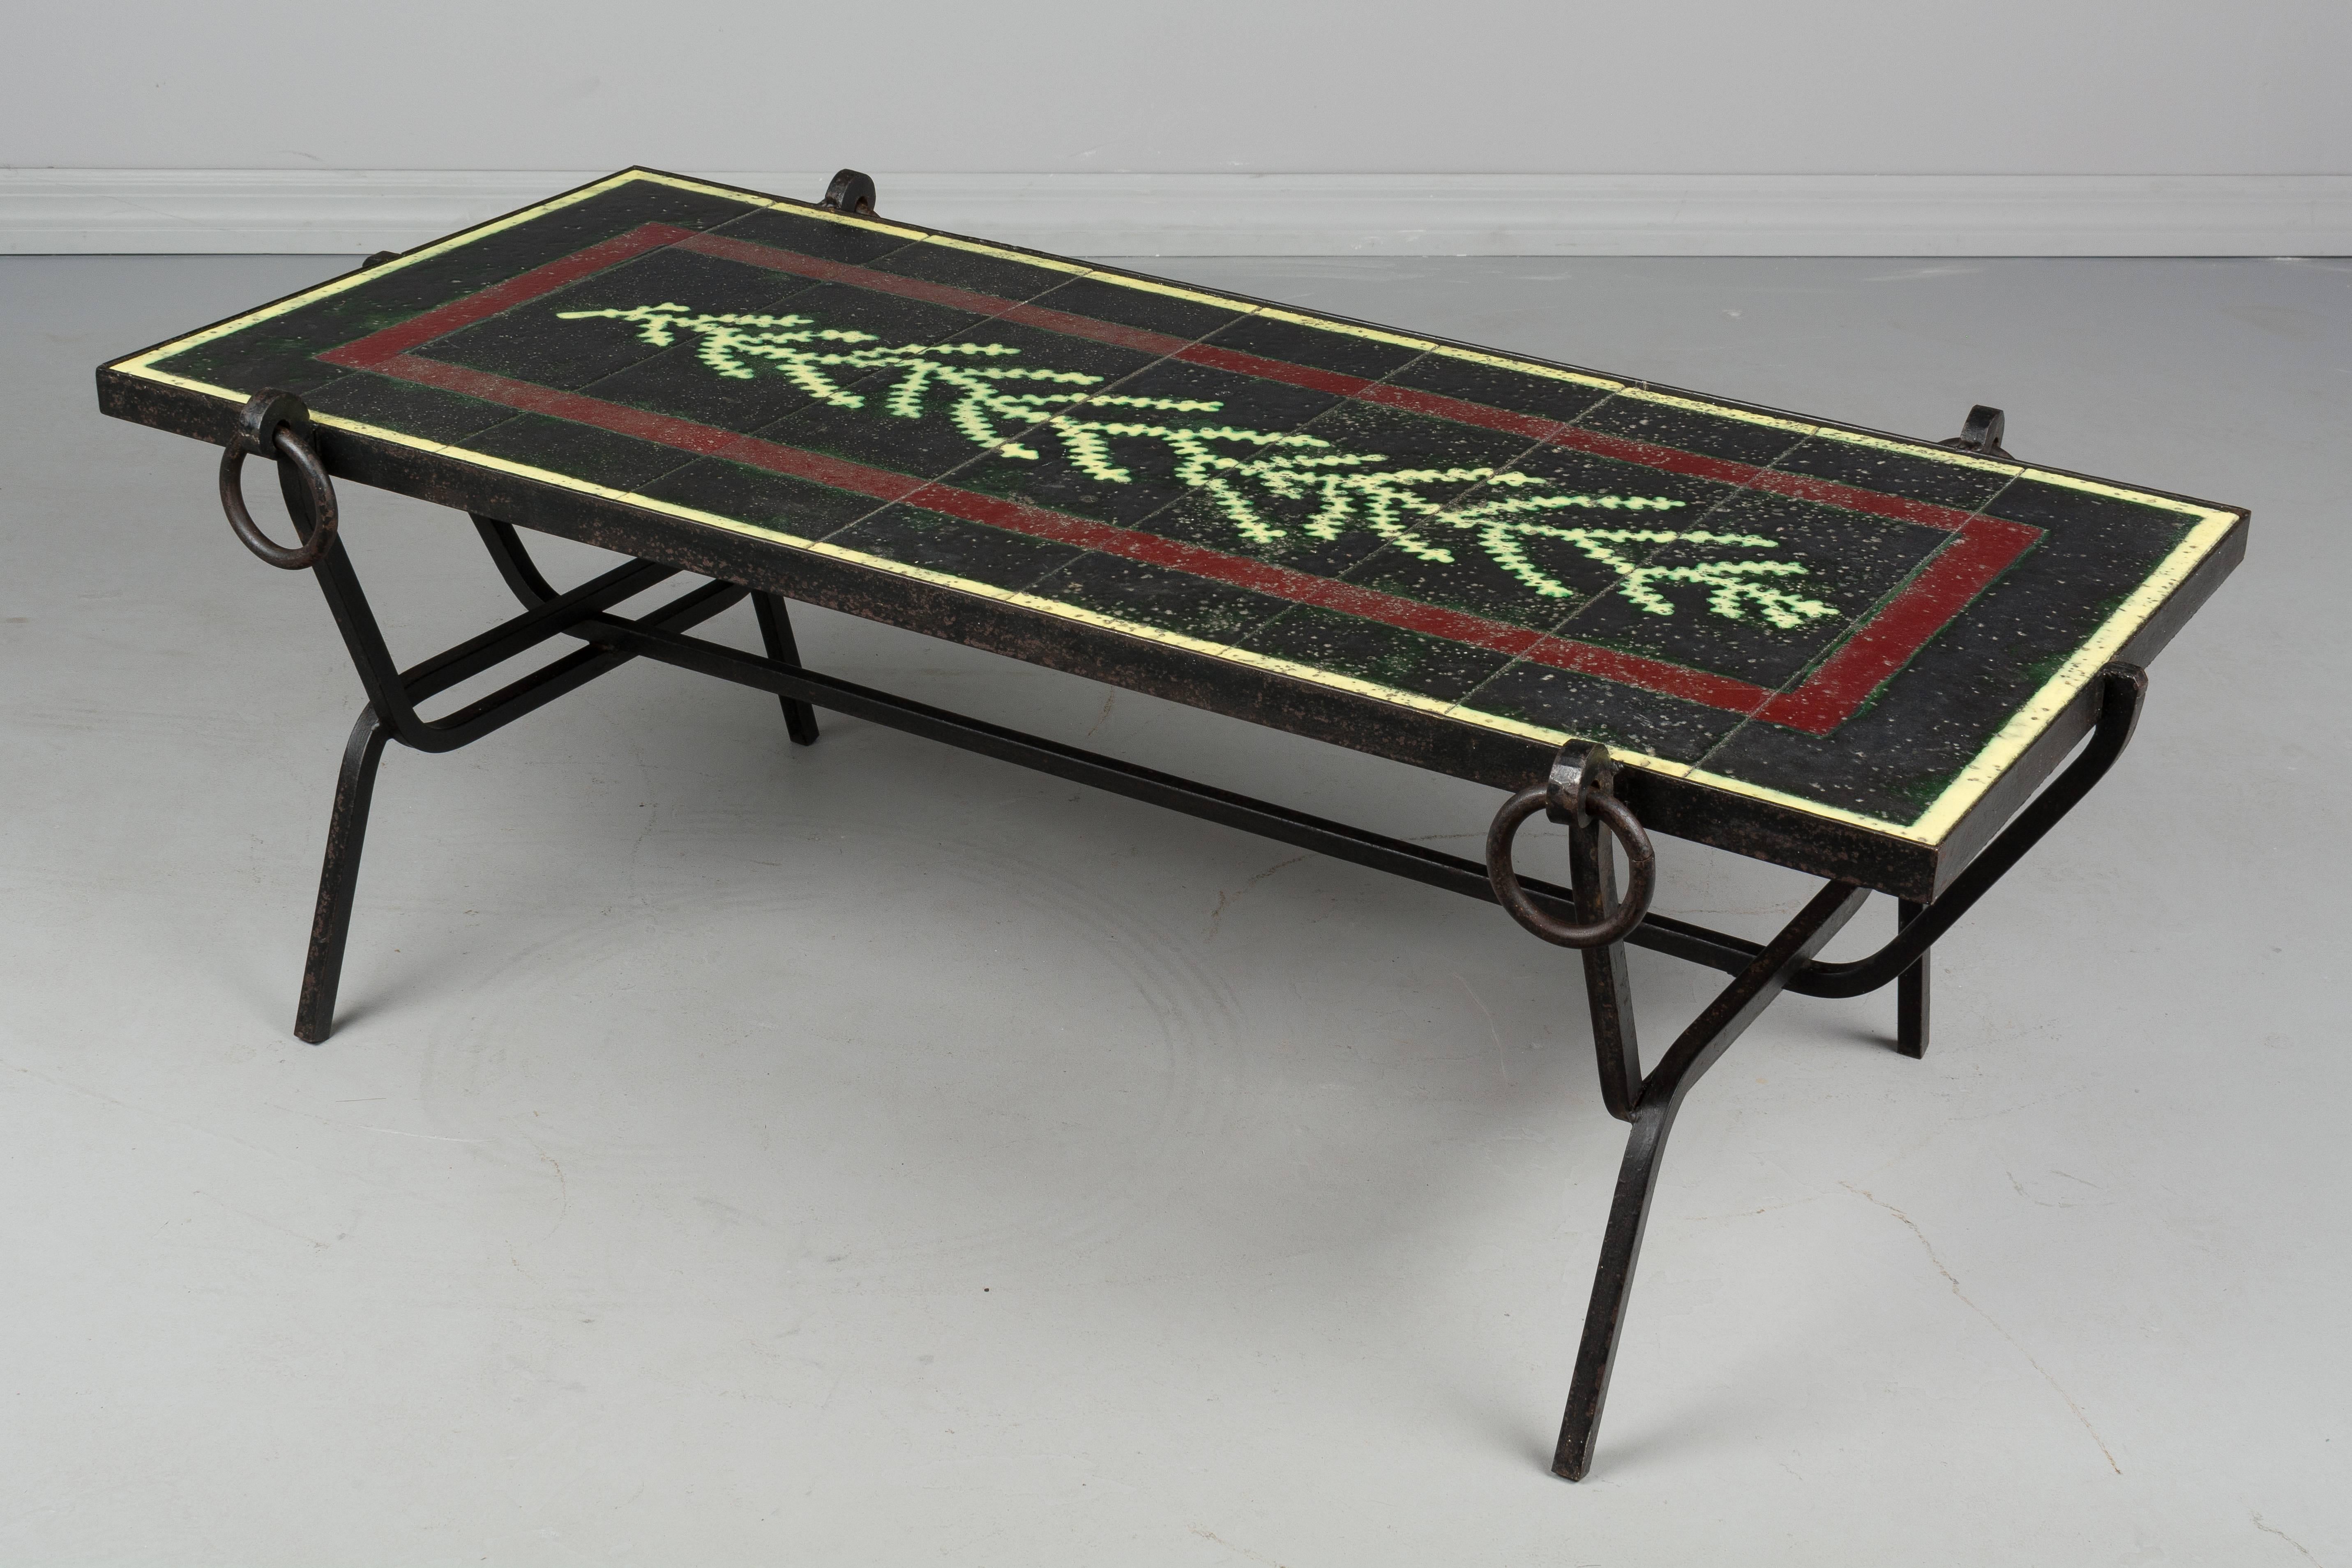 A Mid-Century Modern Jacques Adnet wrought iron table with glazed lava stone tile top. Nine tiles form a green vine or seaweed design on a black ground with burgundy border and yellow outline around the perimeter. Tiles are in excellent condition